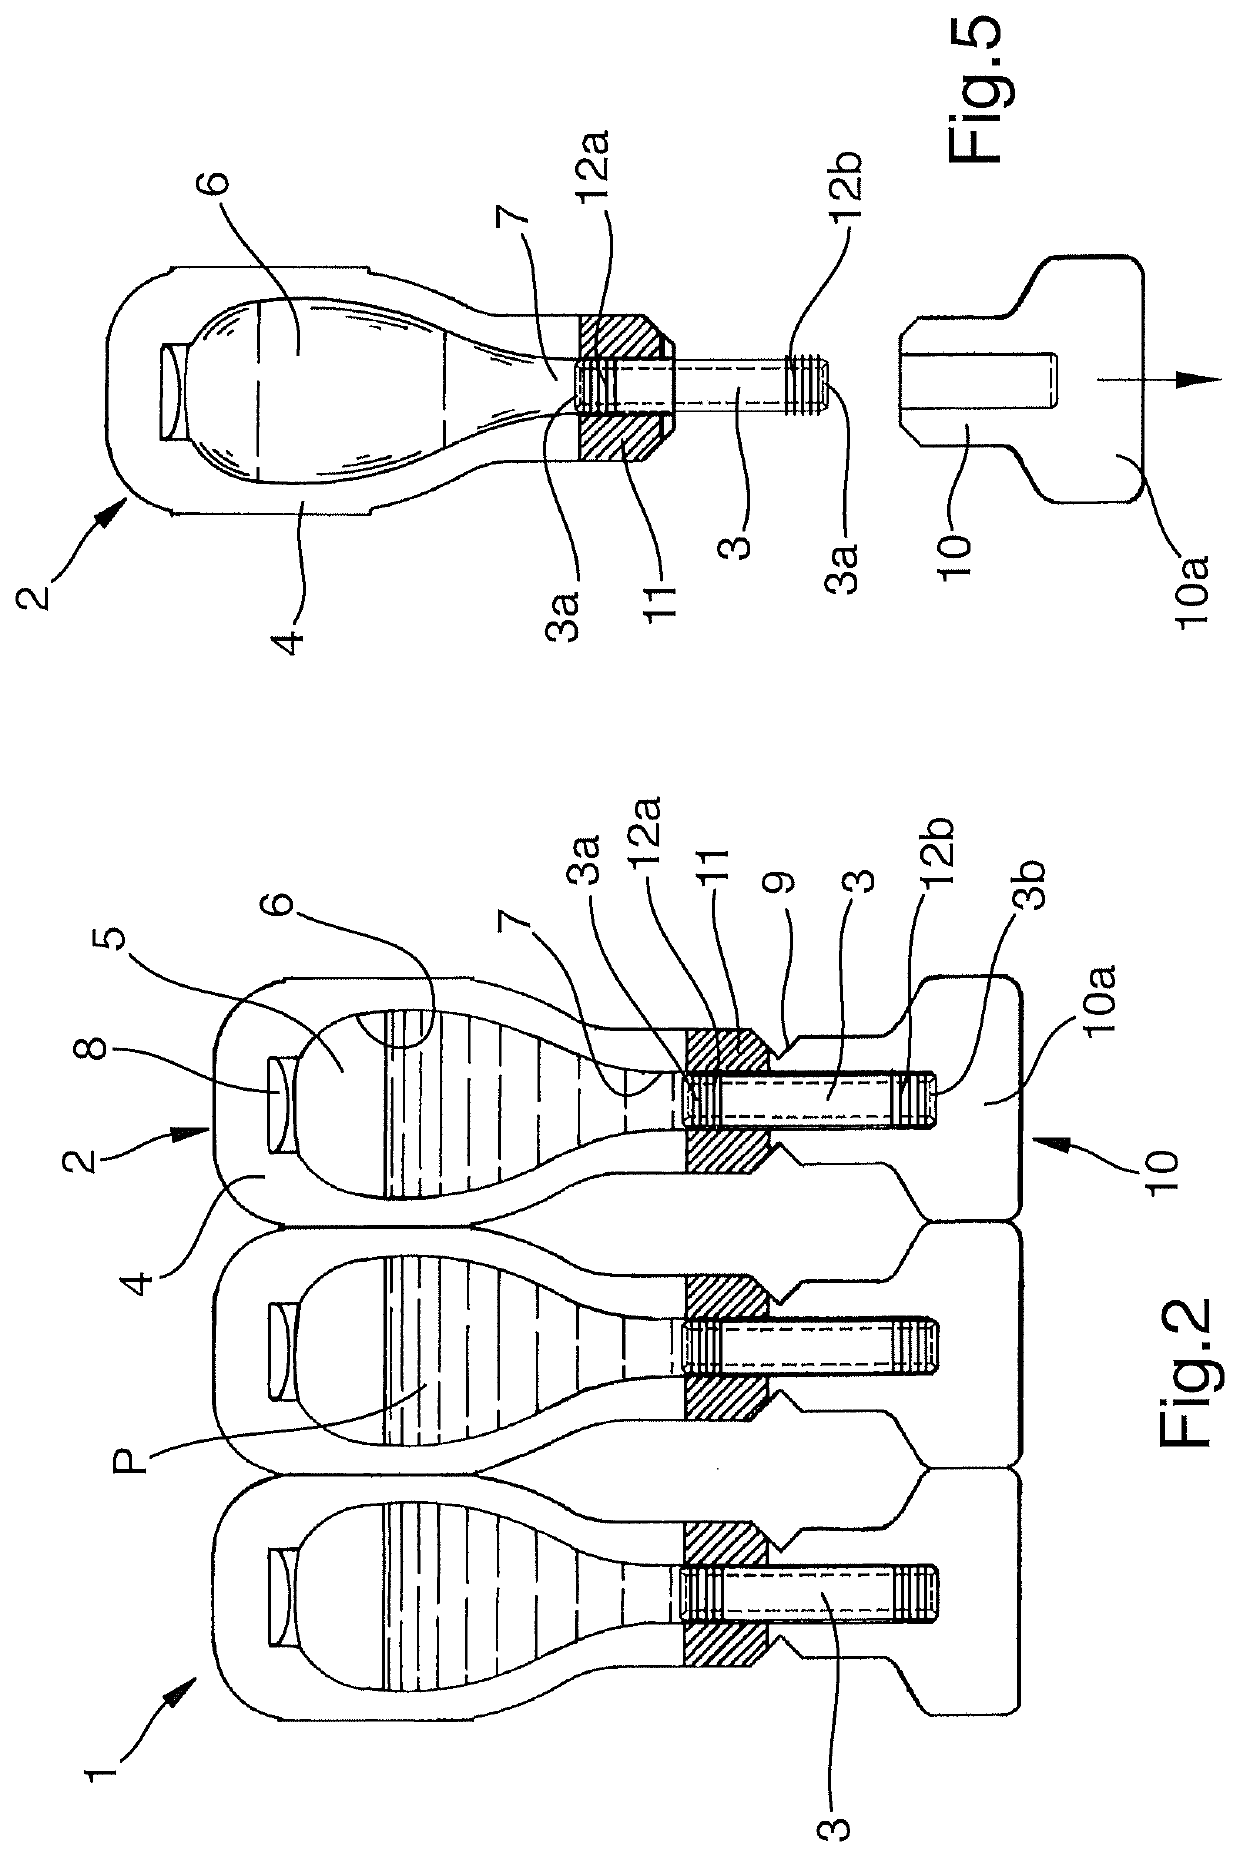 Unit of packaged product, and method of packaging a product